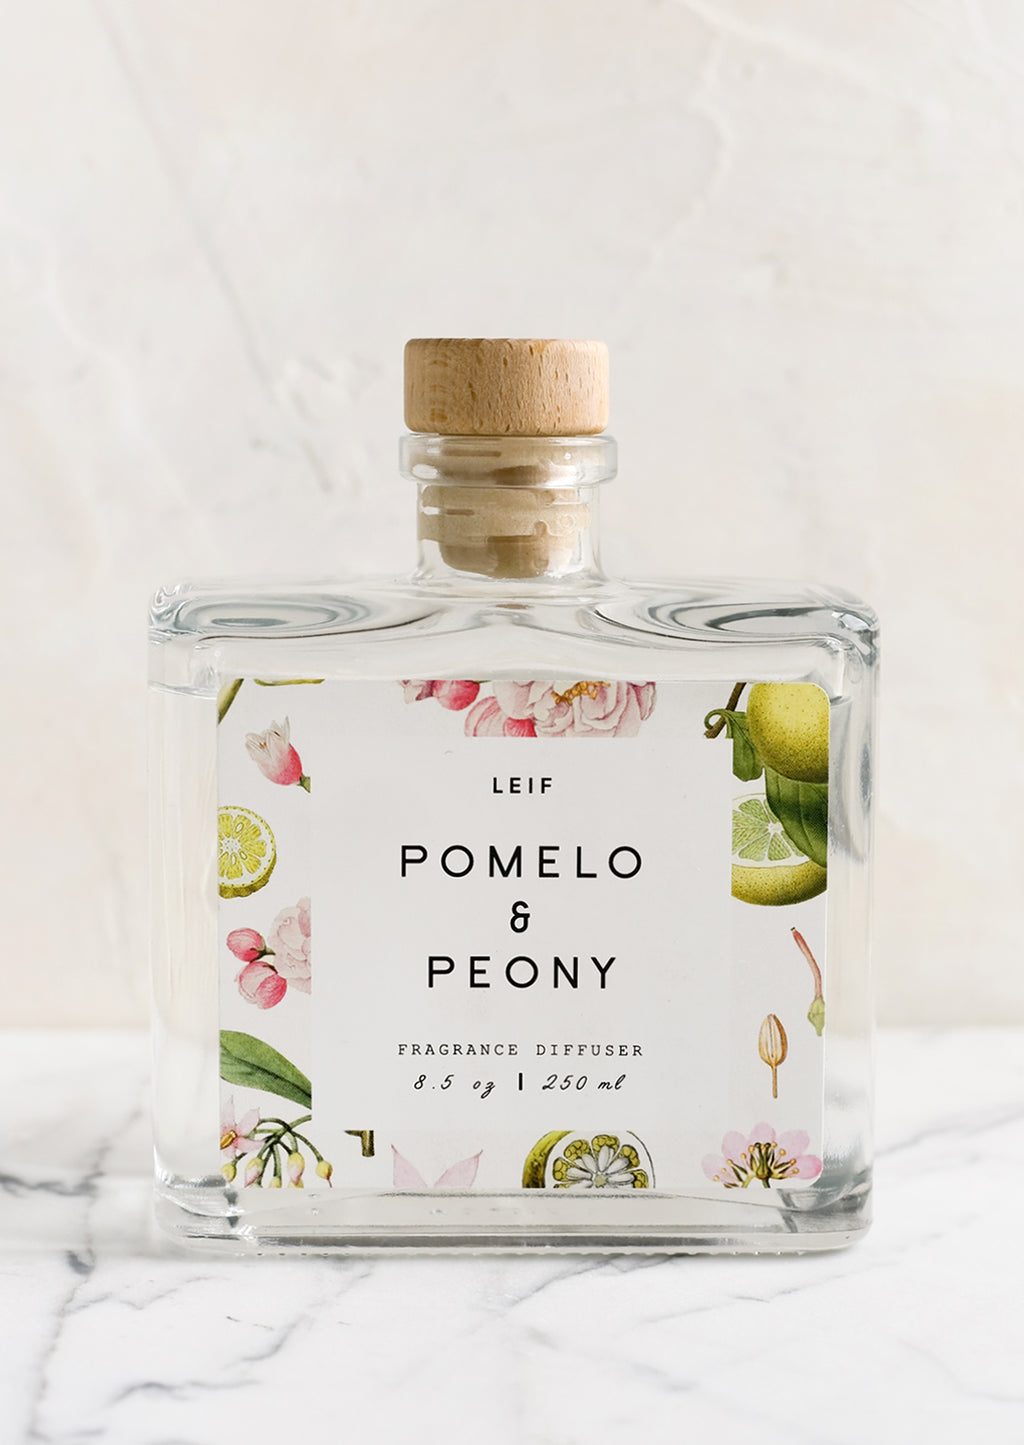 Pomelo & Peony: A pomelo and peony scented reed diffuser with glass bottle.